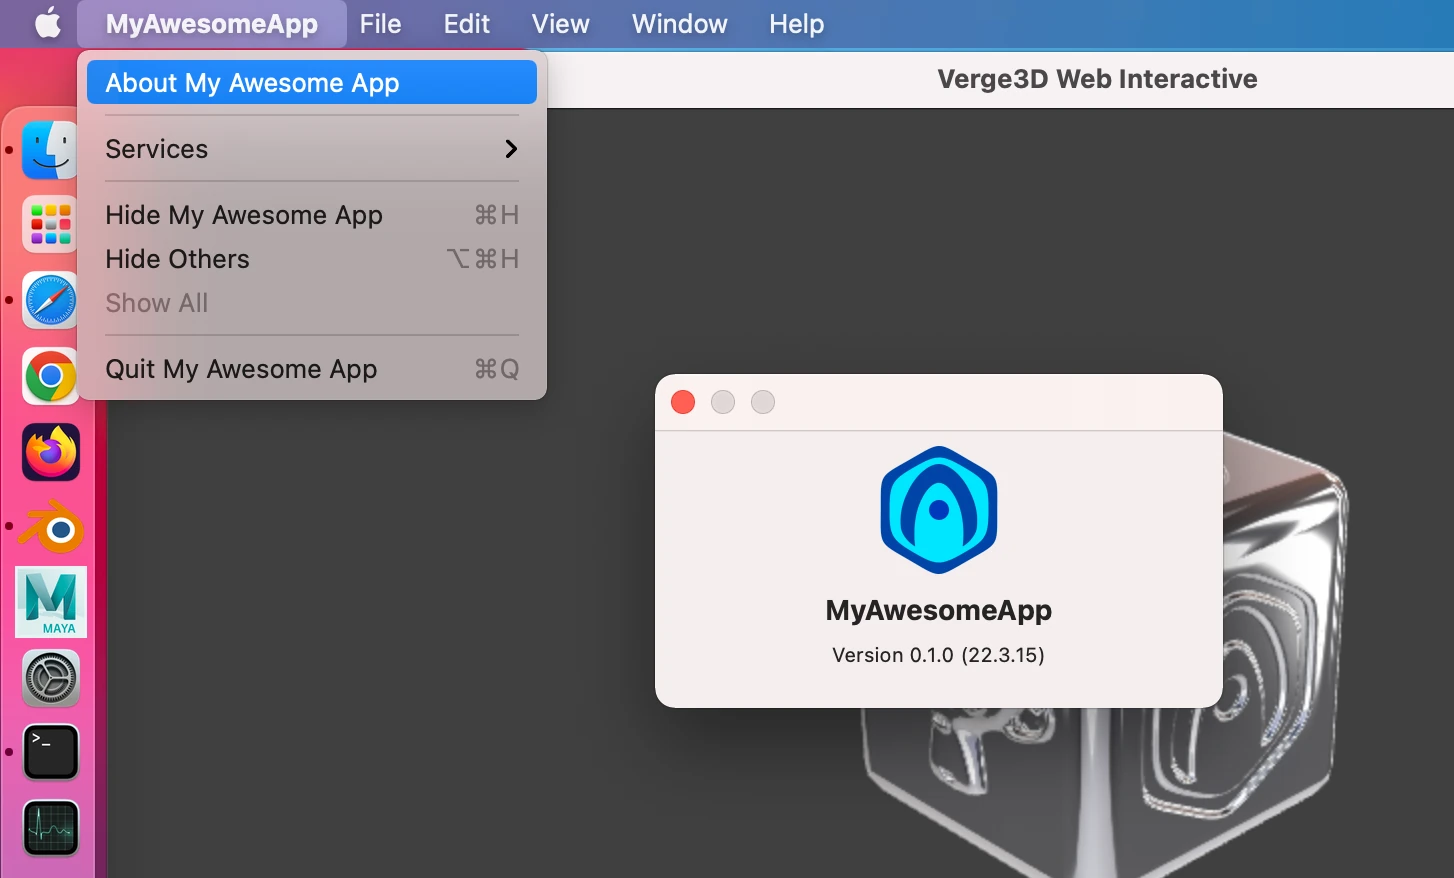 Verge3D-3ds Max: electron app file properties on macos